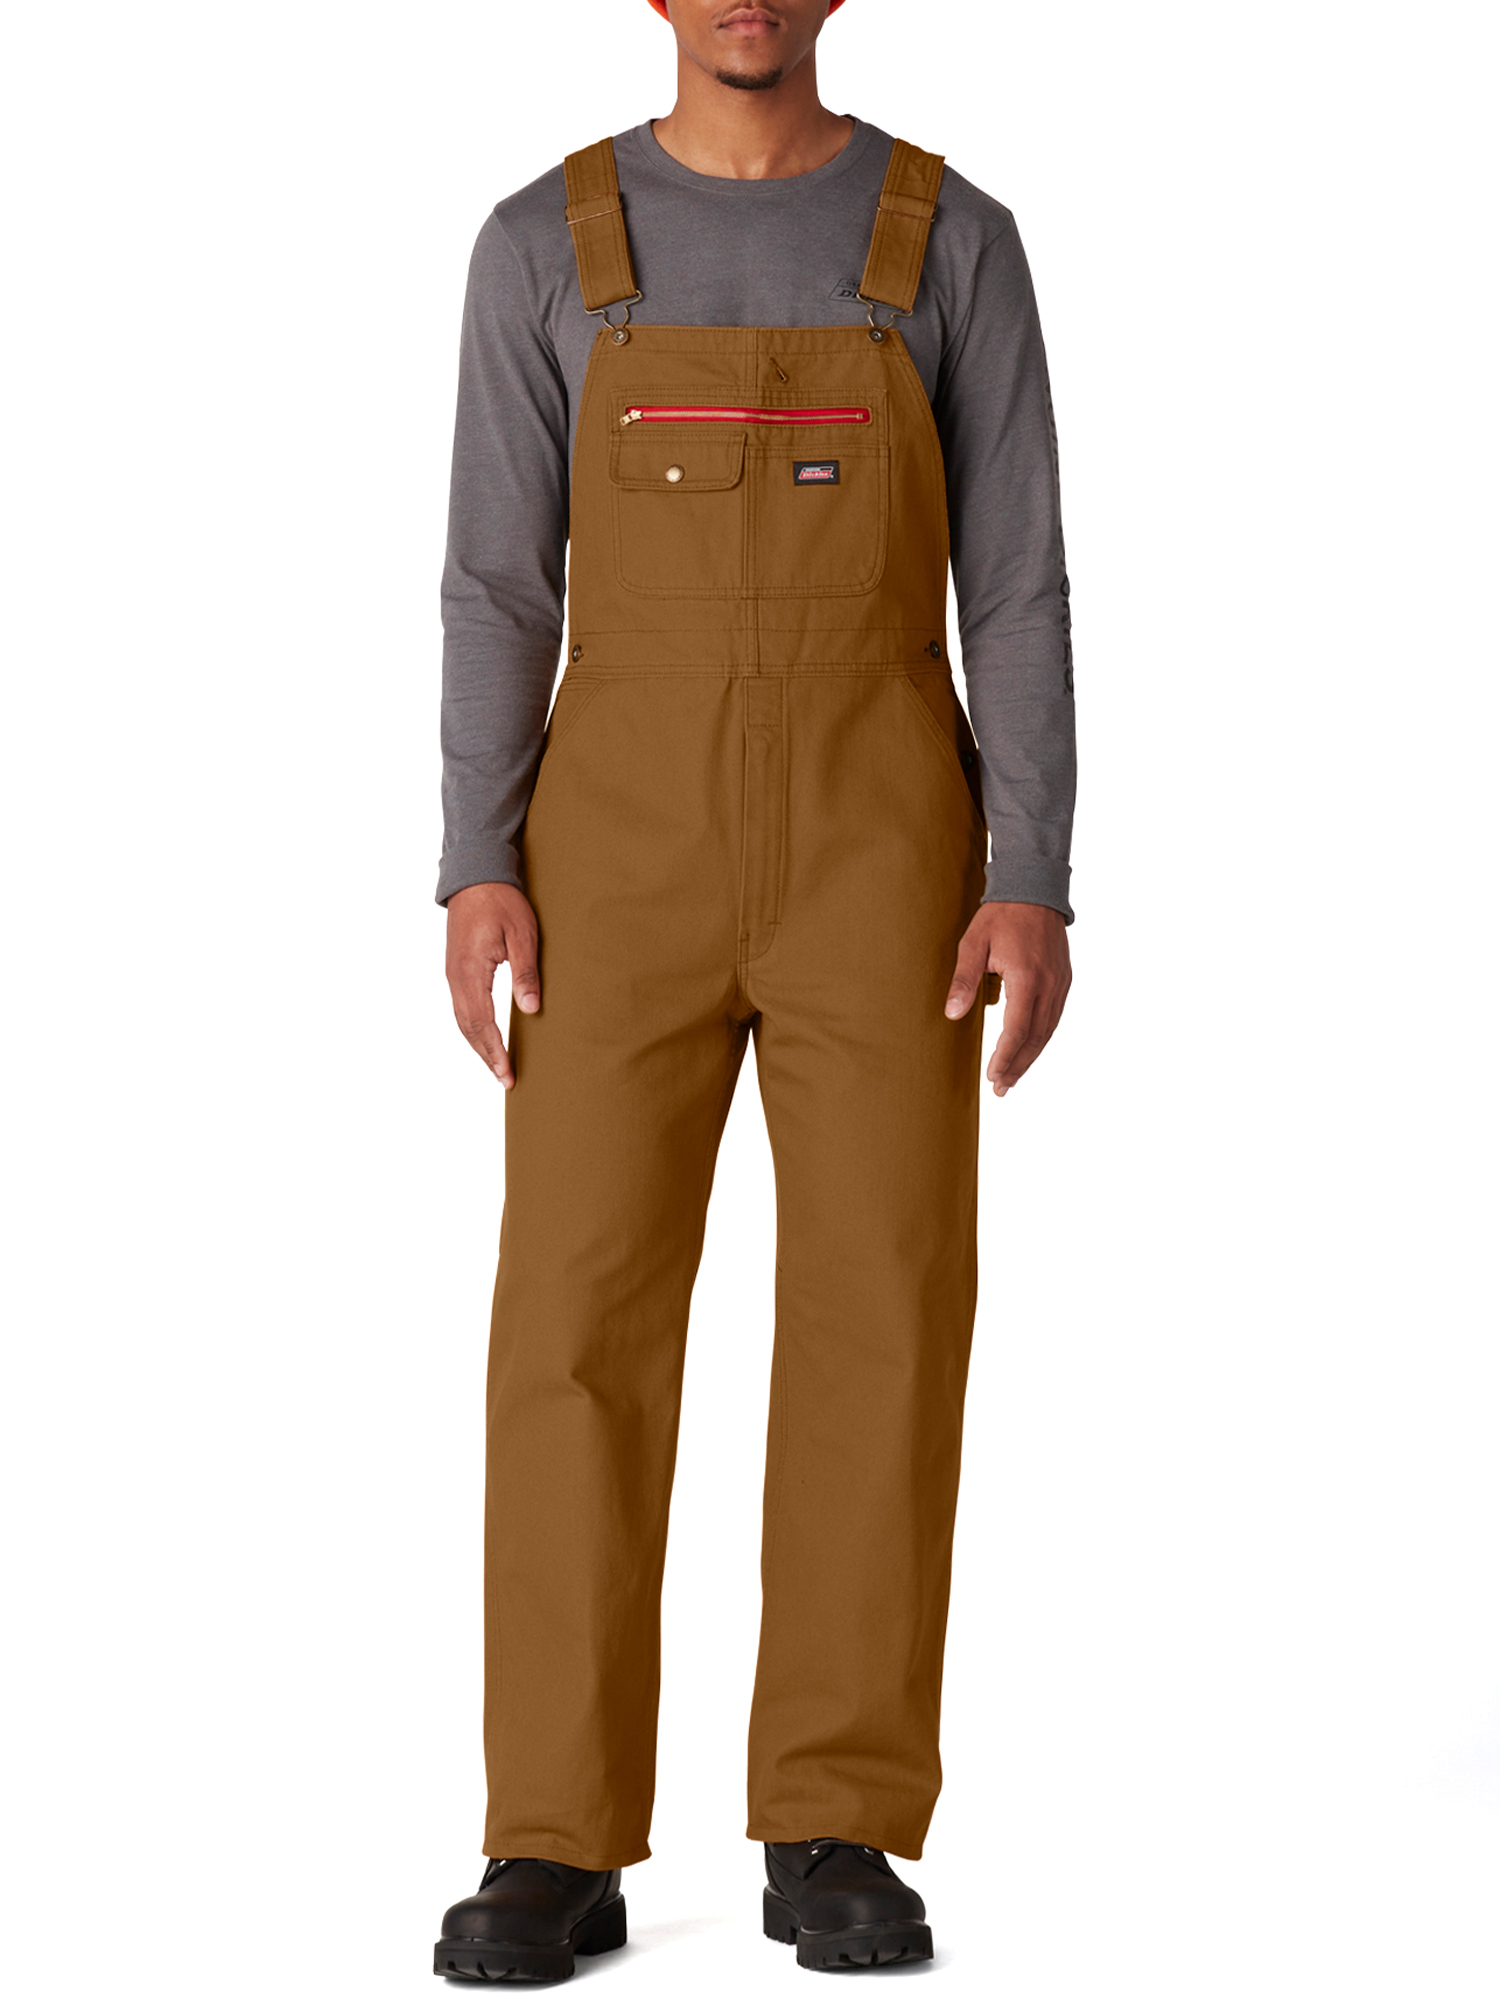 Genuine Dickies Men's Relaxed Fit Ultra Tough Workwear Bib Overall - image 1 of 5